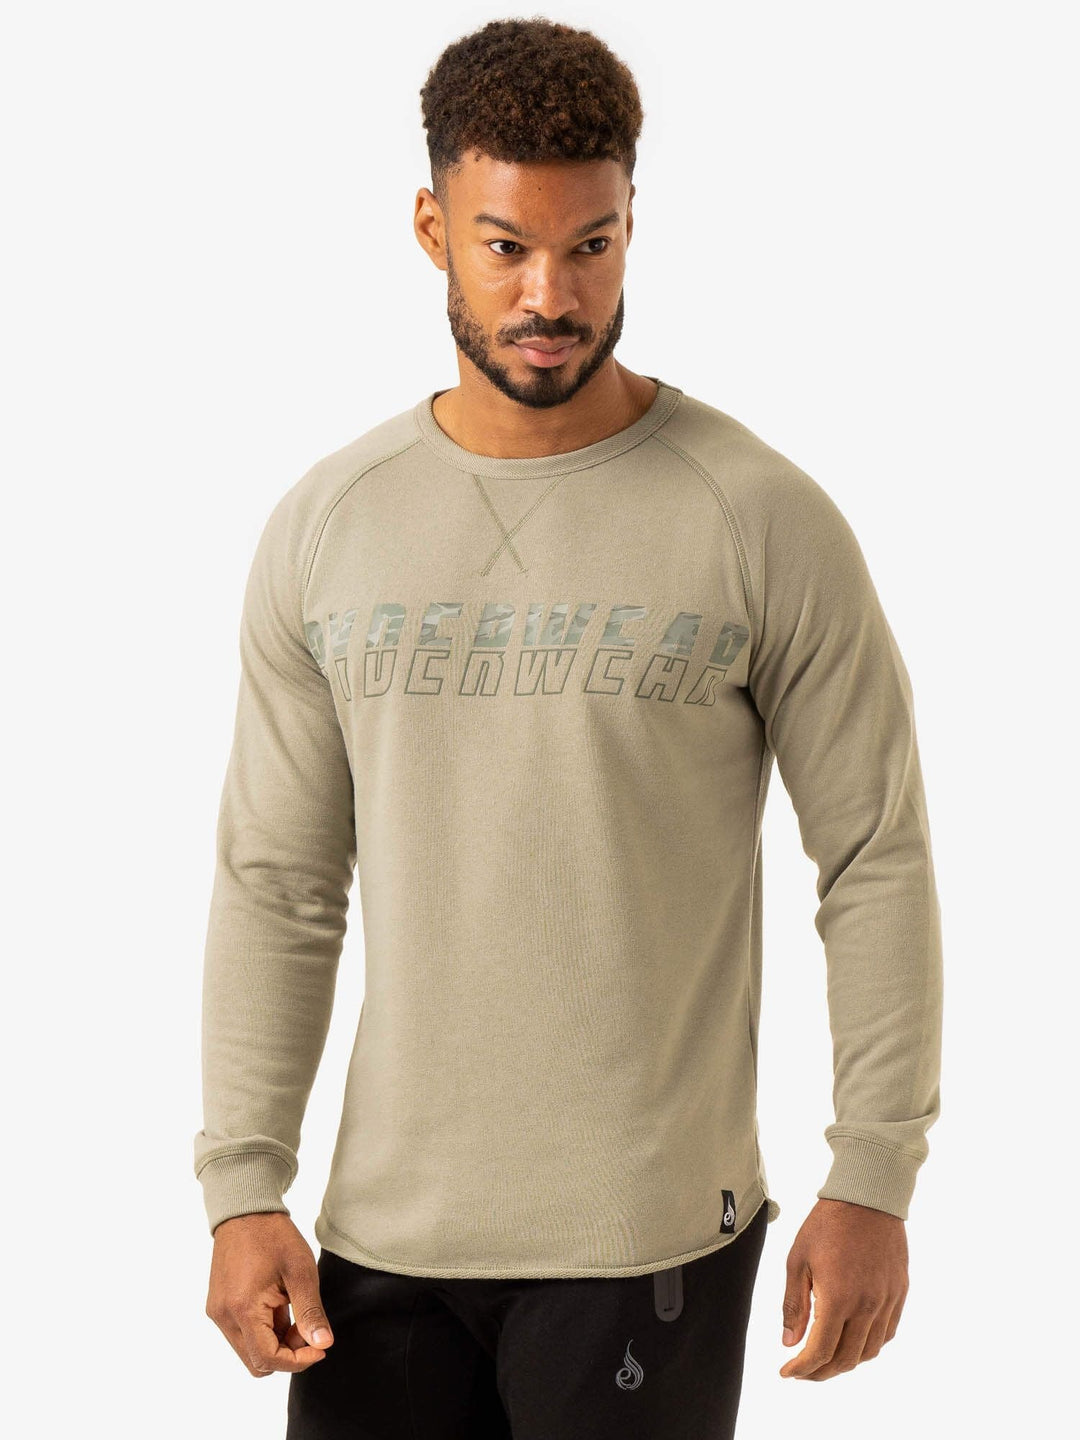 Overdrive Crew Neck - Sage Green Clothing Ryderwear 